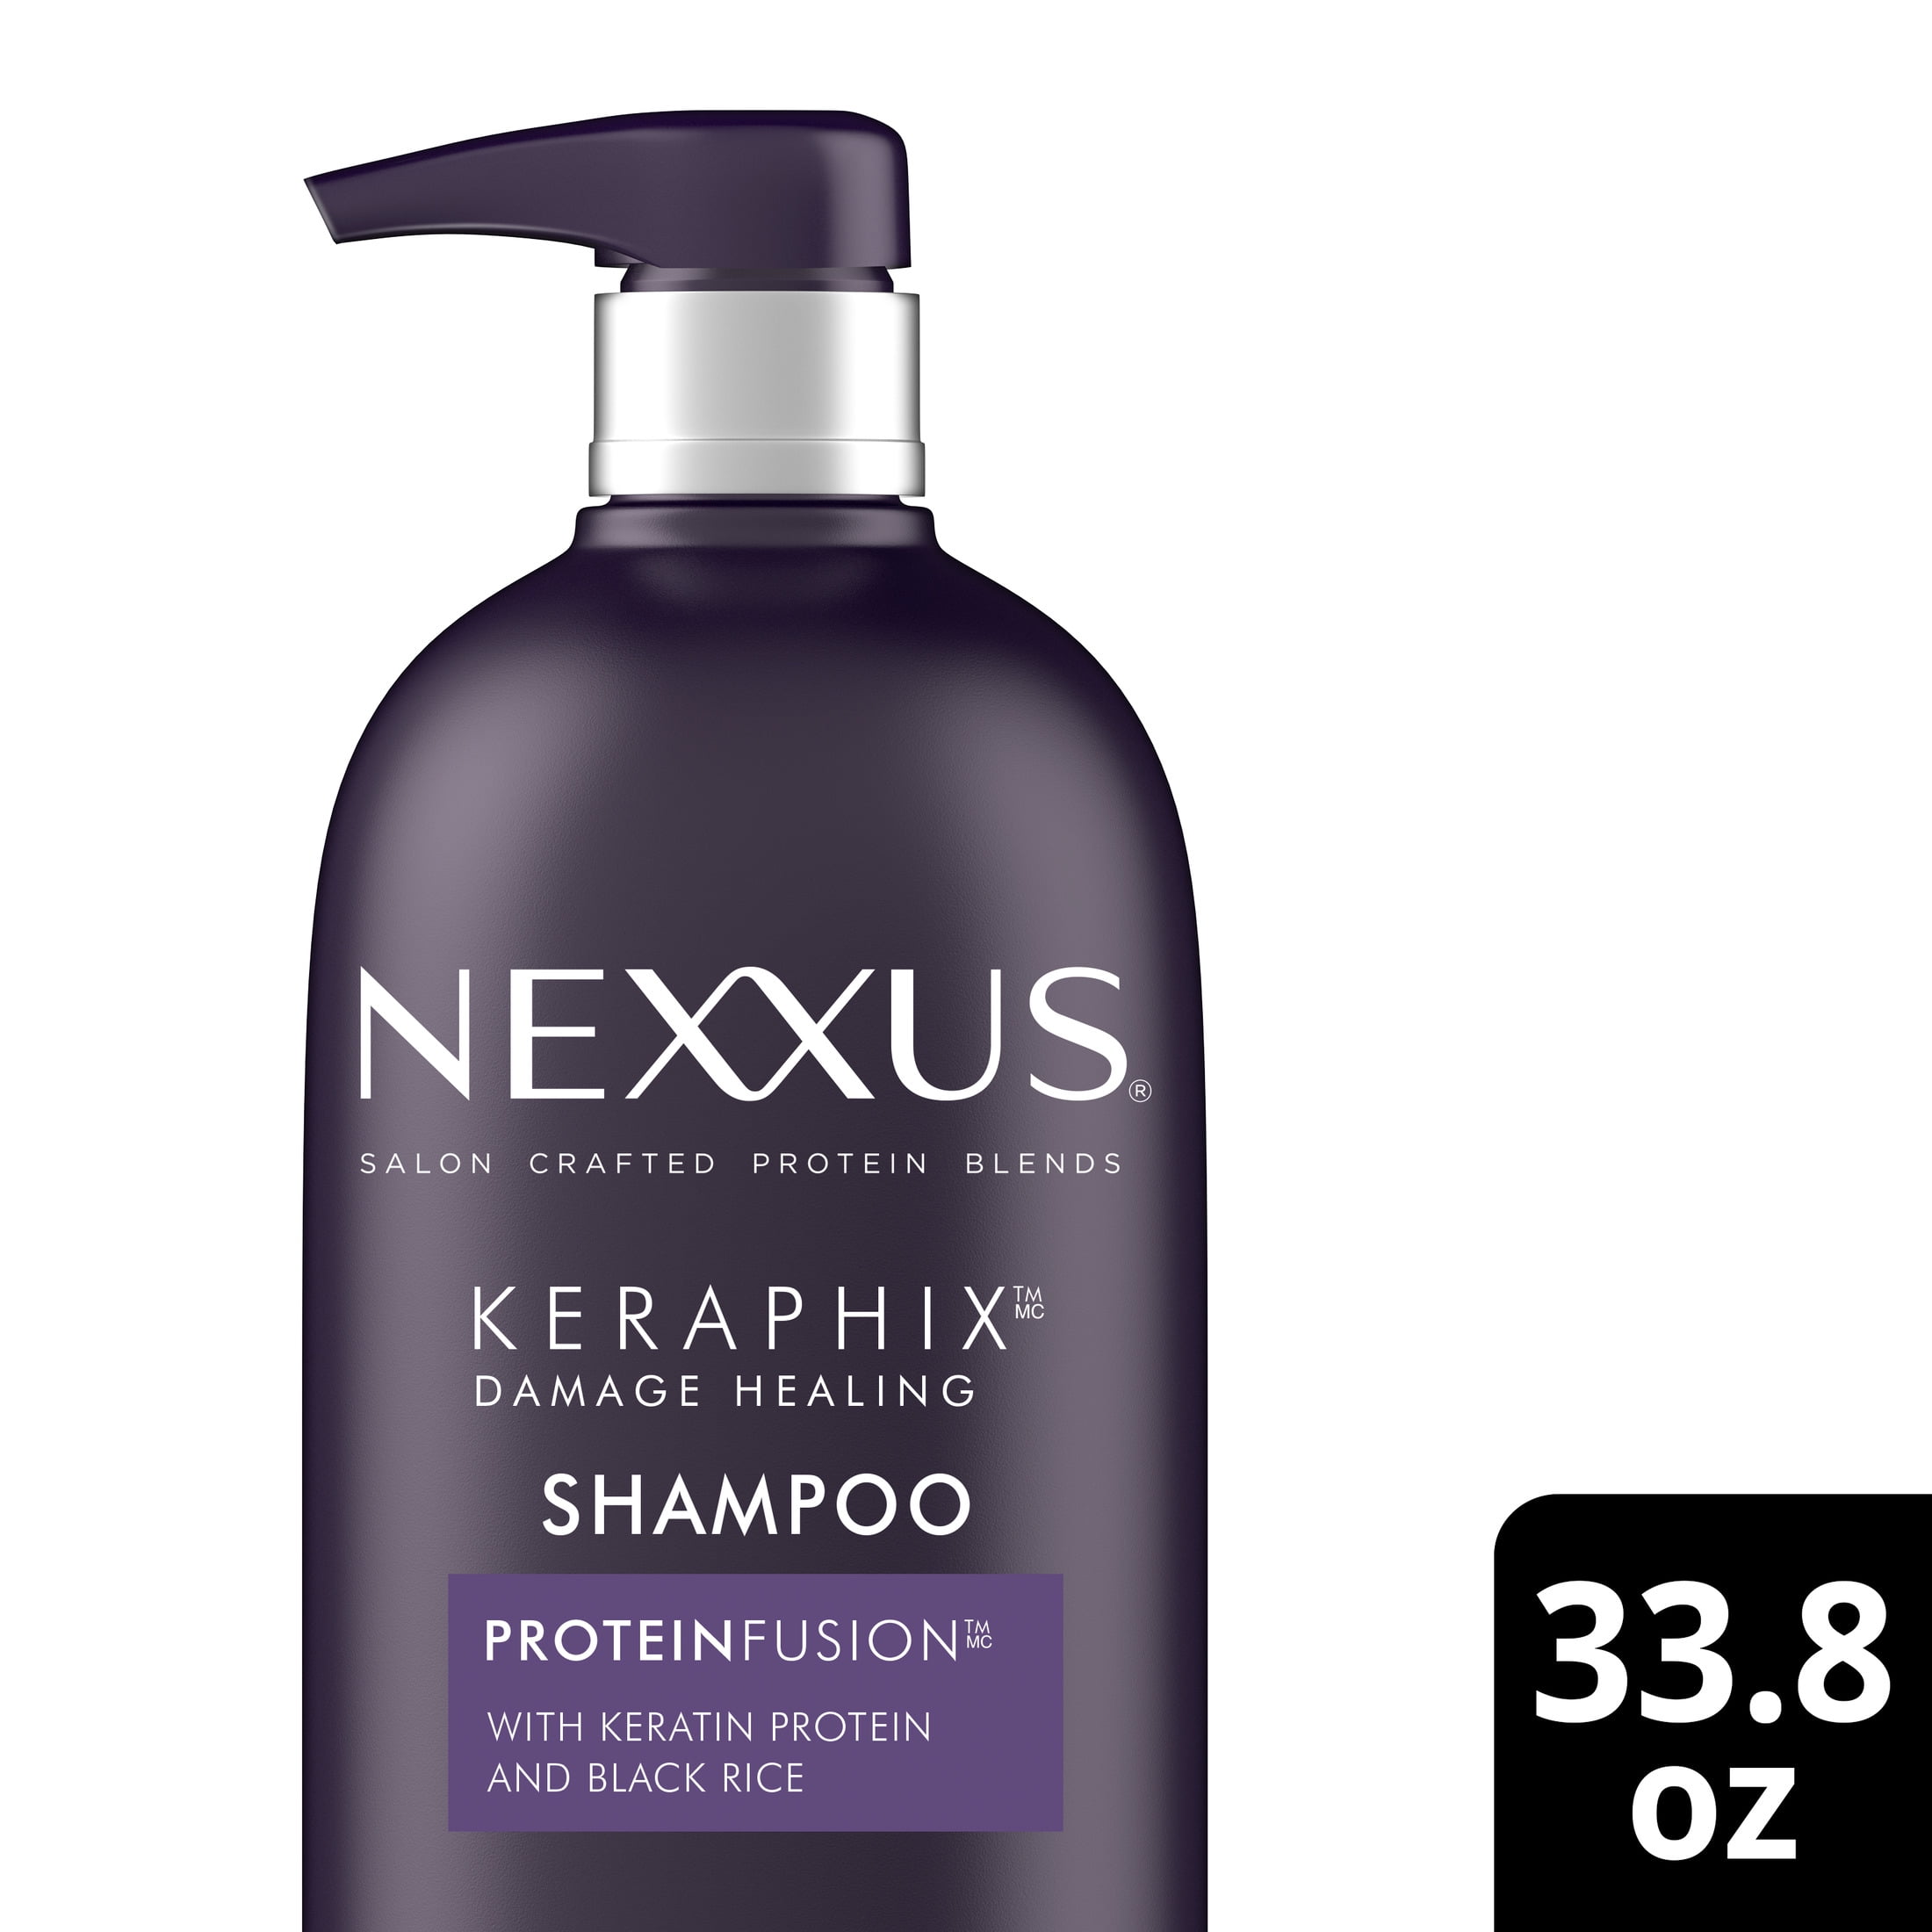 Keraphix Shampoo With ProteinFusion for Damaged Hair Keratin Protein, Black Rice, 33.8 oz - Walmart.com